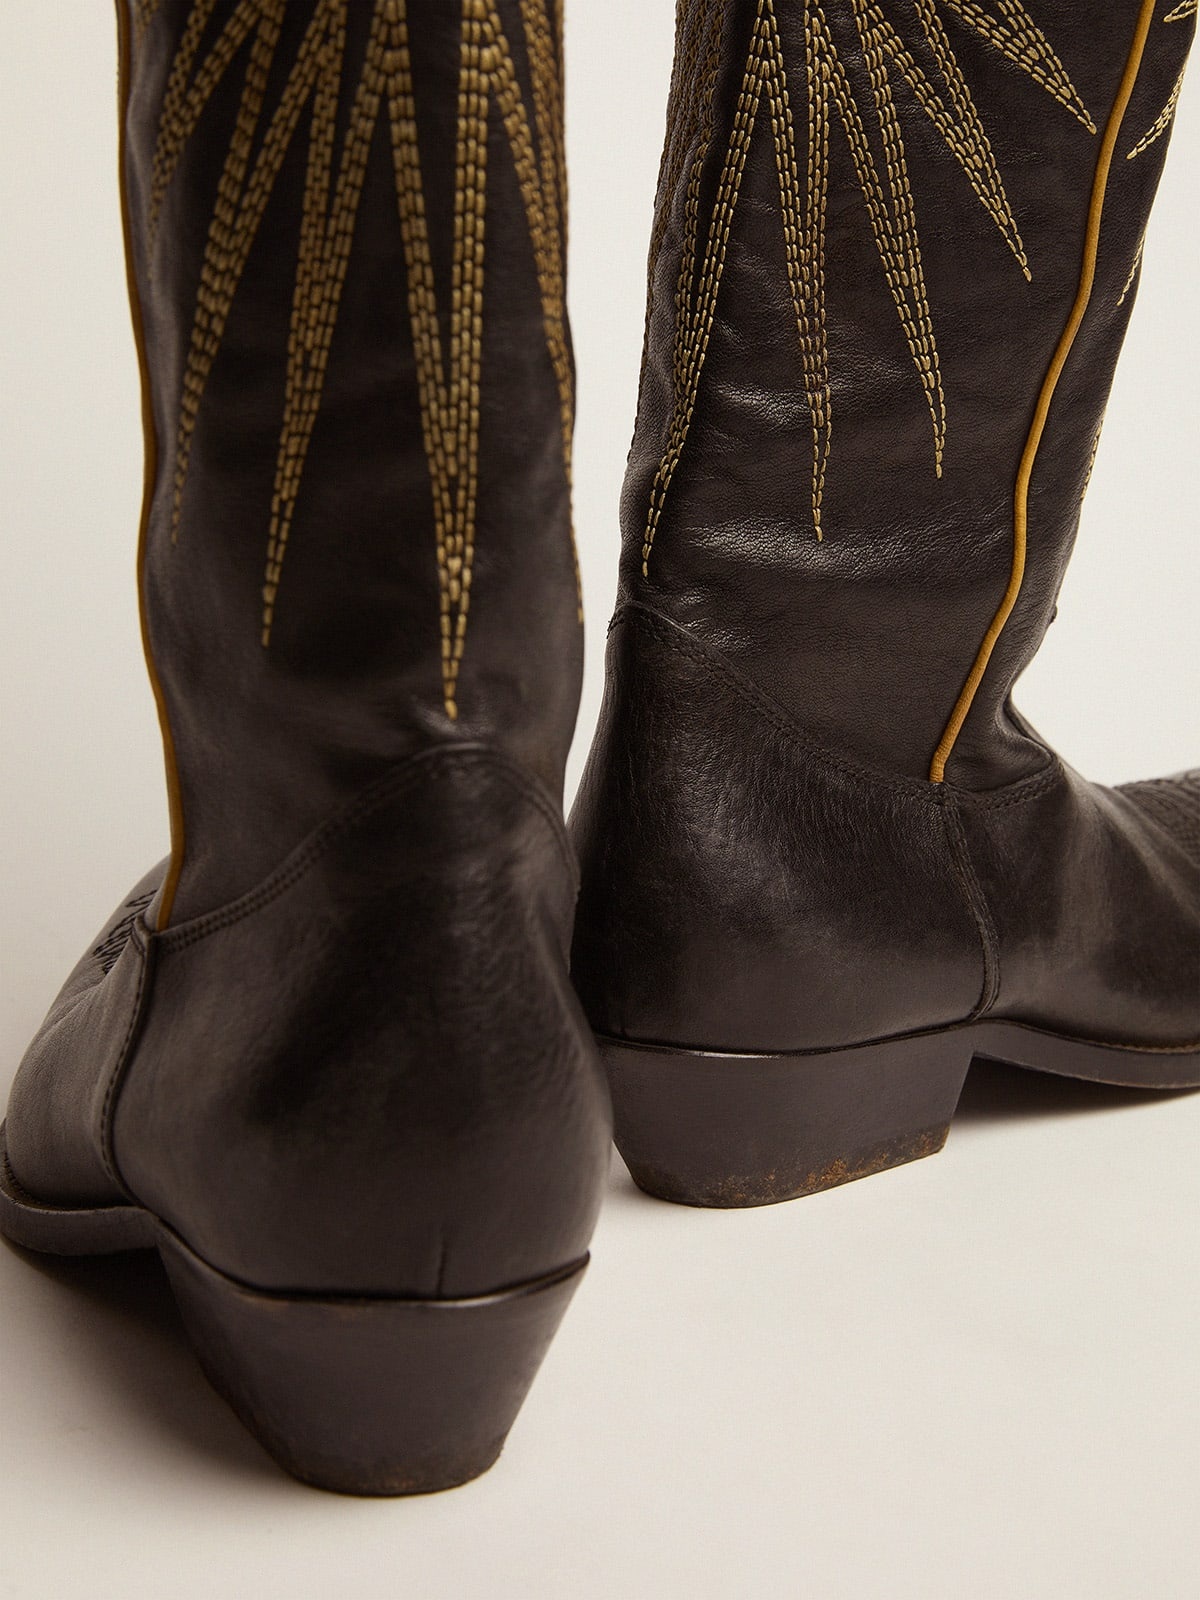 Women's boots in black leather with platinum star inlay - 5